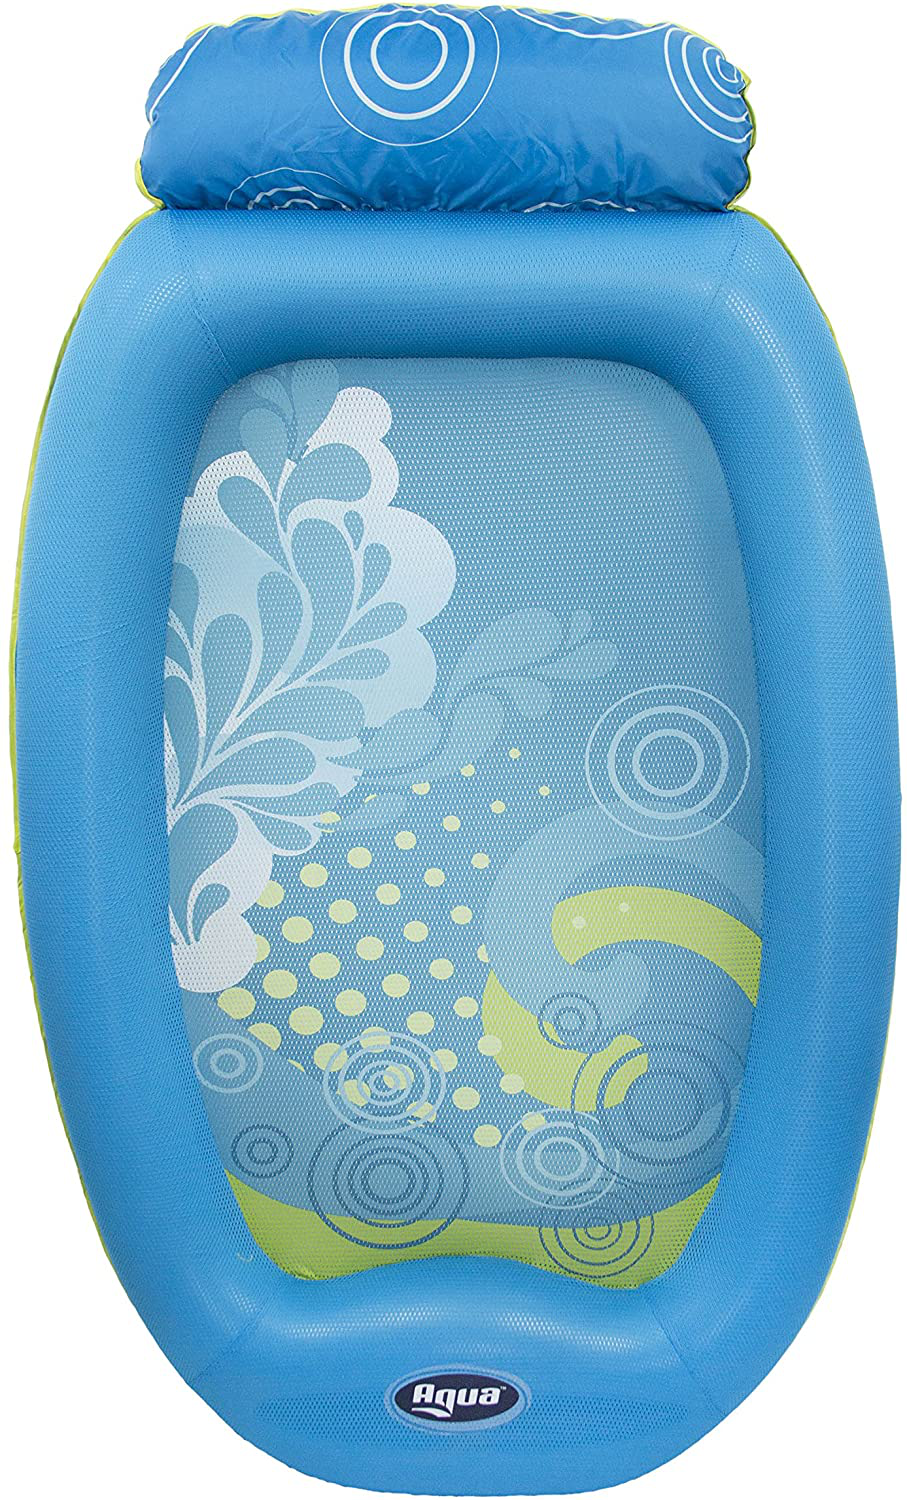 Aqua Comfort Luxury Water Lounge, X-Large, Inflatable Pool Float with Headrest & Footrest, Bubble Waves (AQL11310WA)